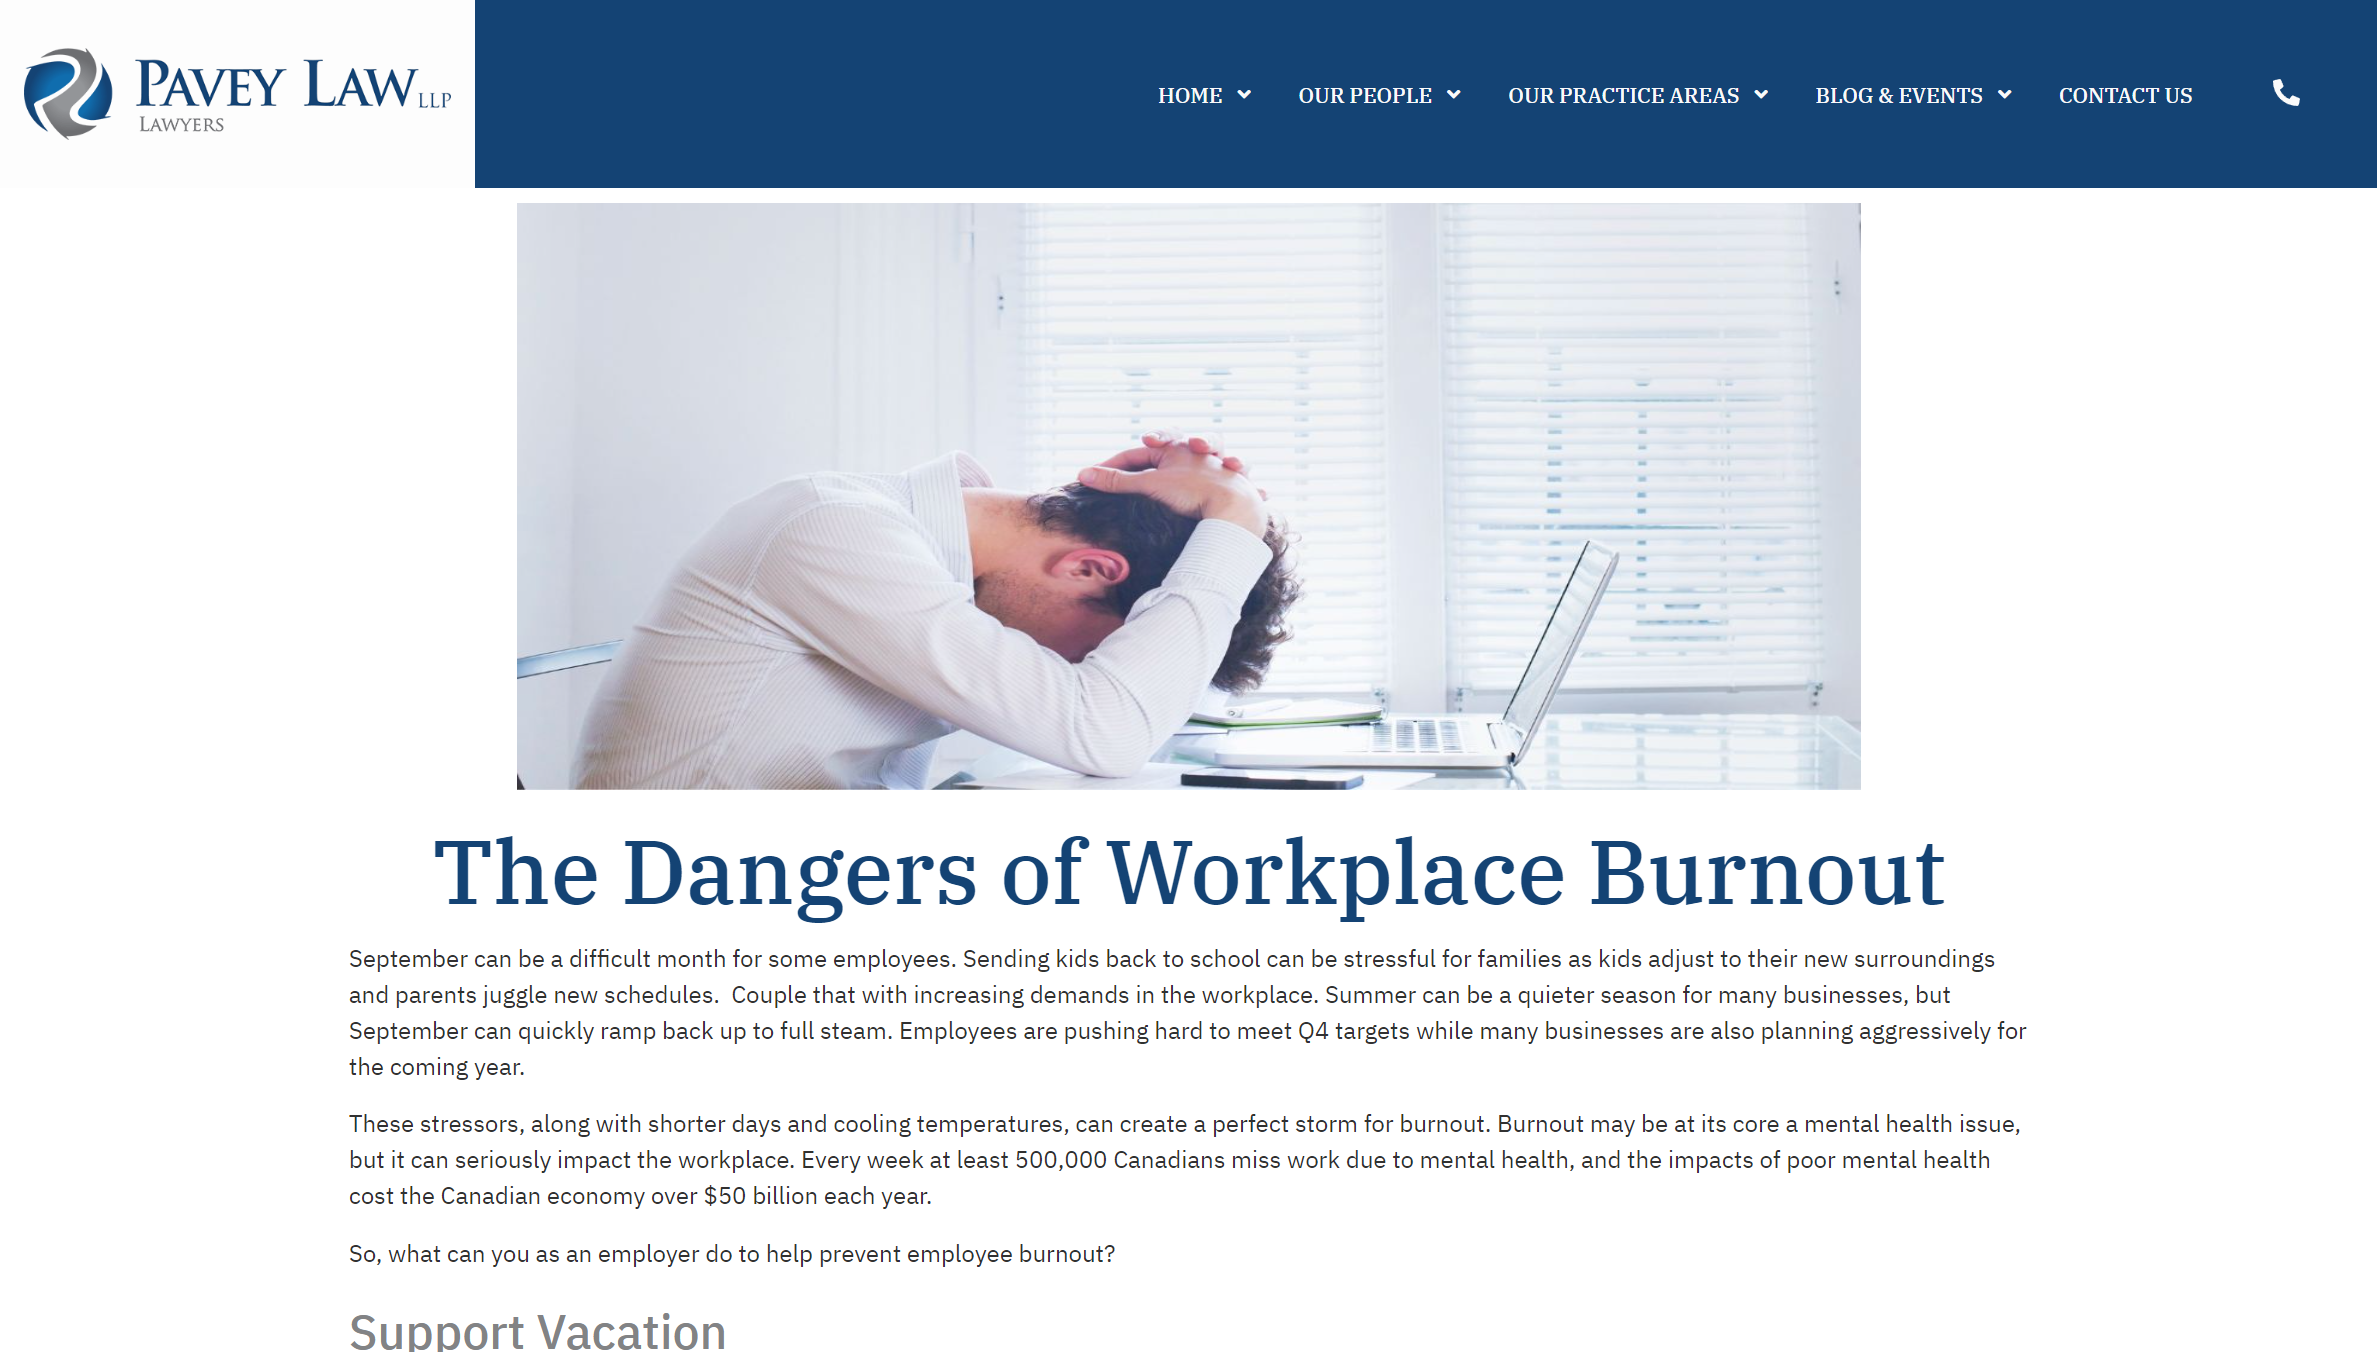 The Dangers of Workplace Burnout